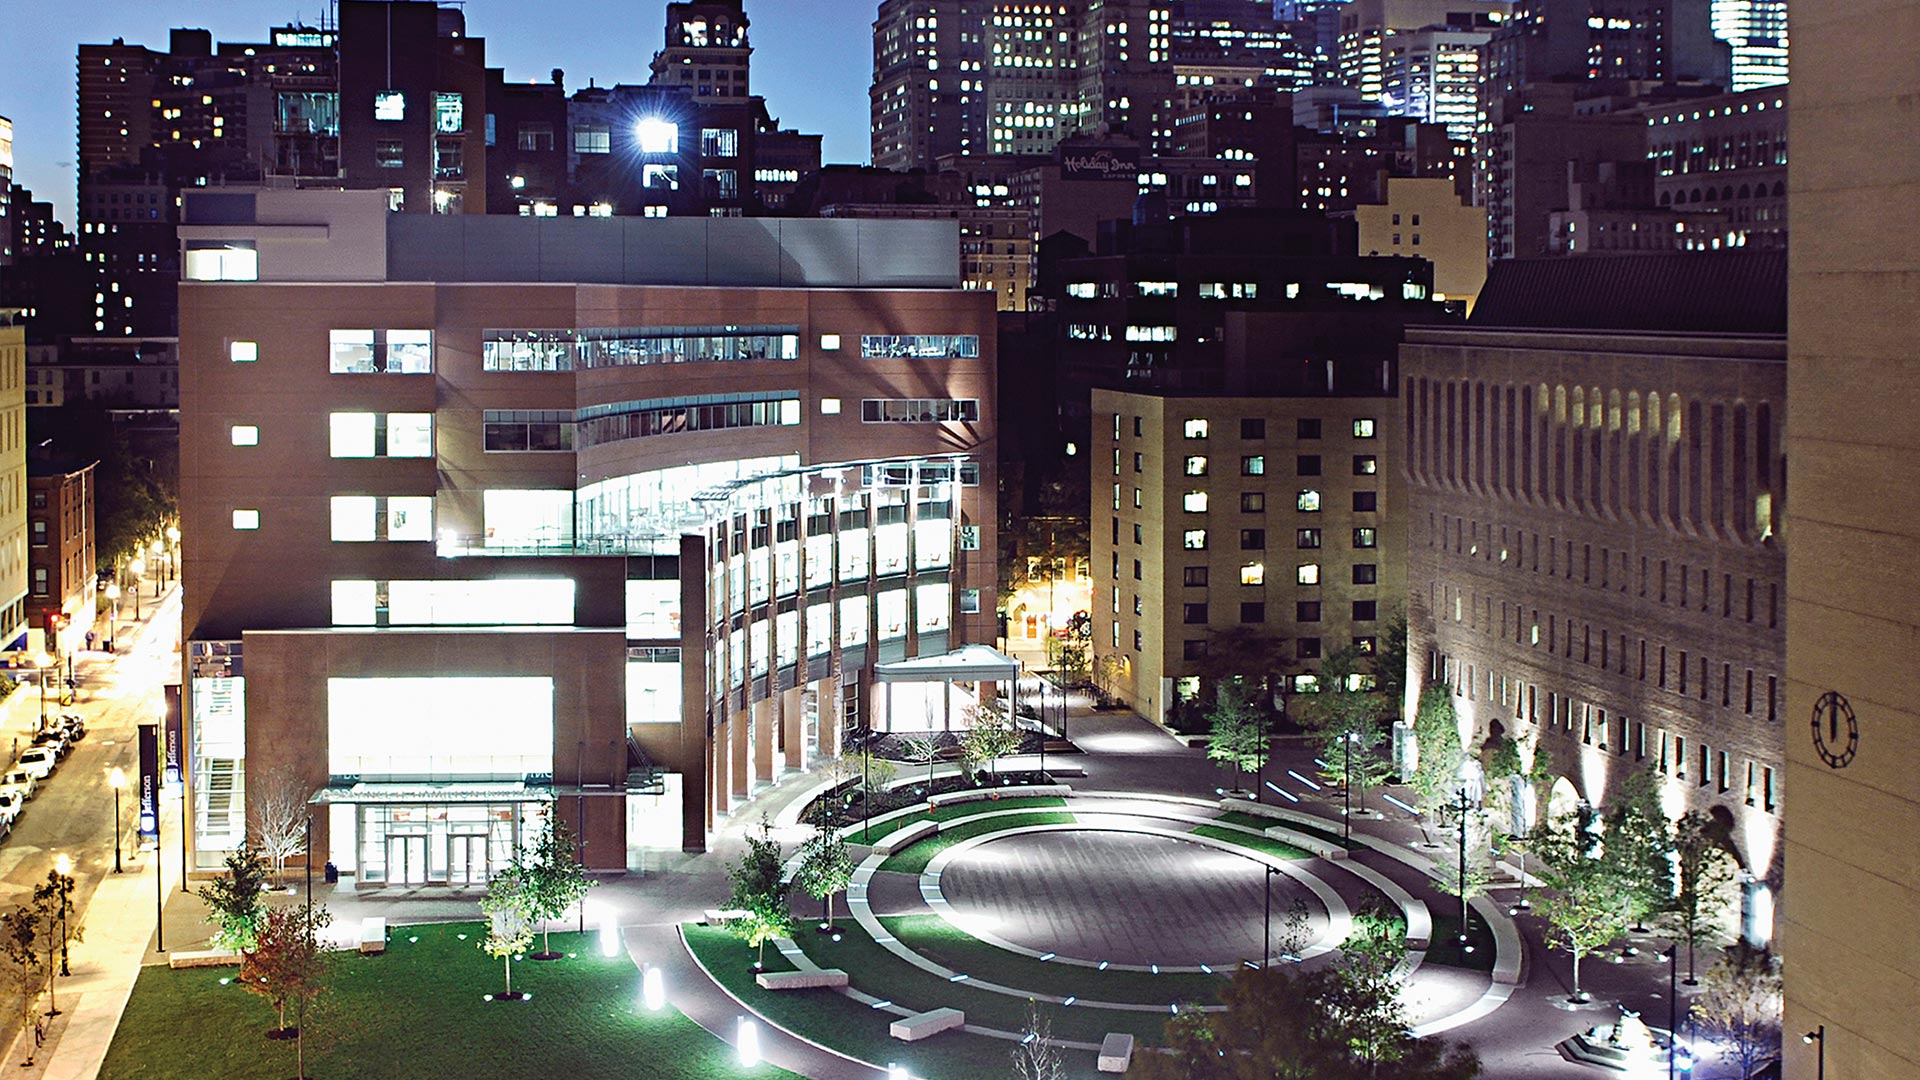 The Sidney Kimmel Medical College at Thomas Jefferson University at dusk with the Jefferson Center City Campus in the foreground.